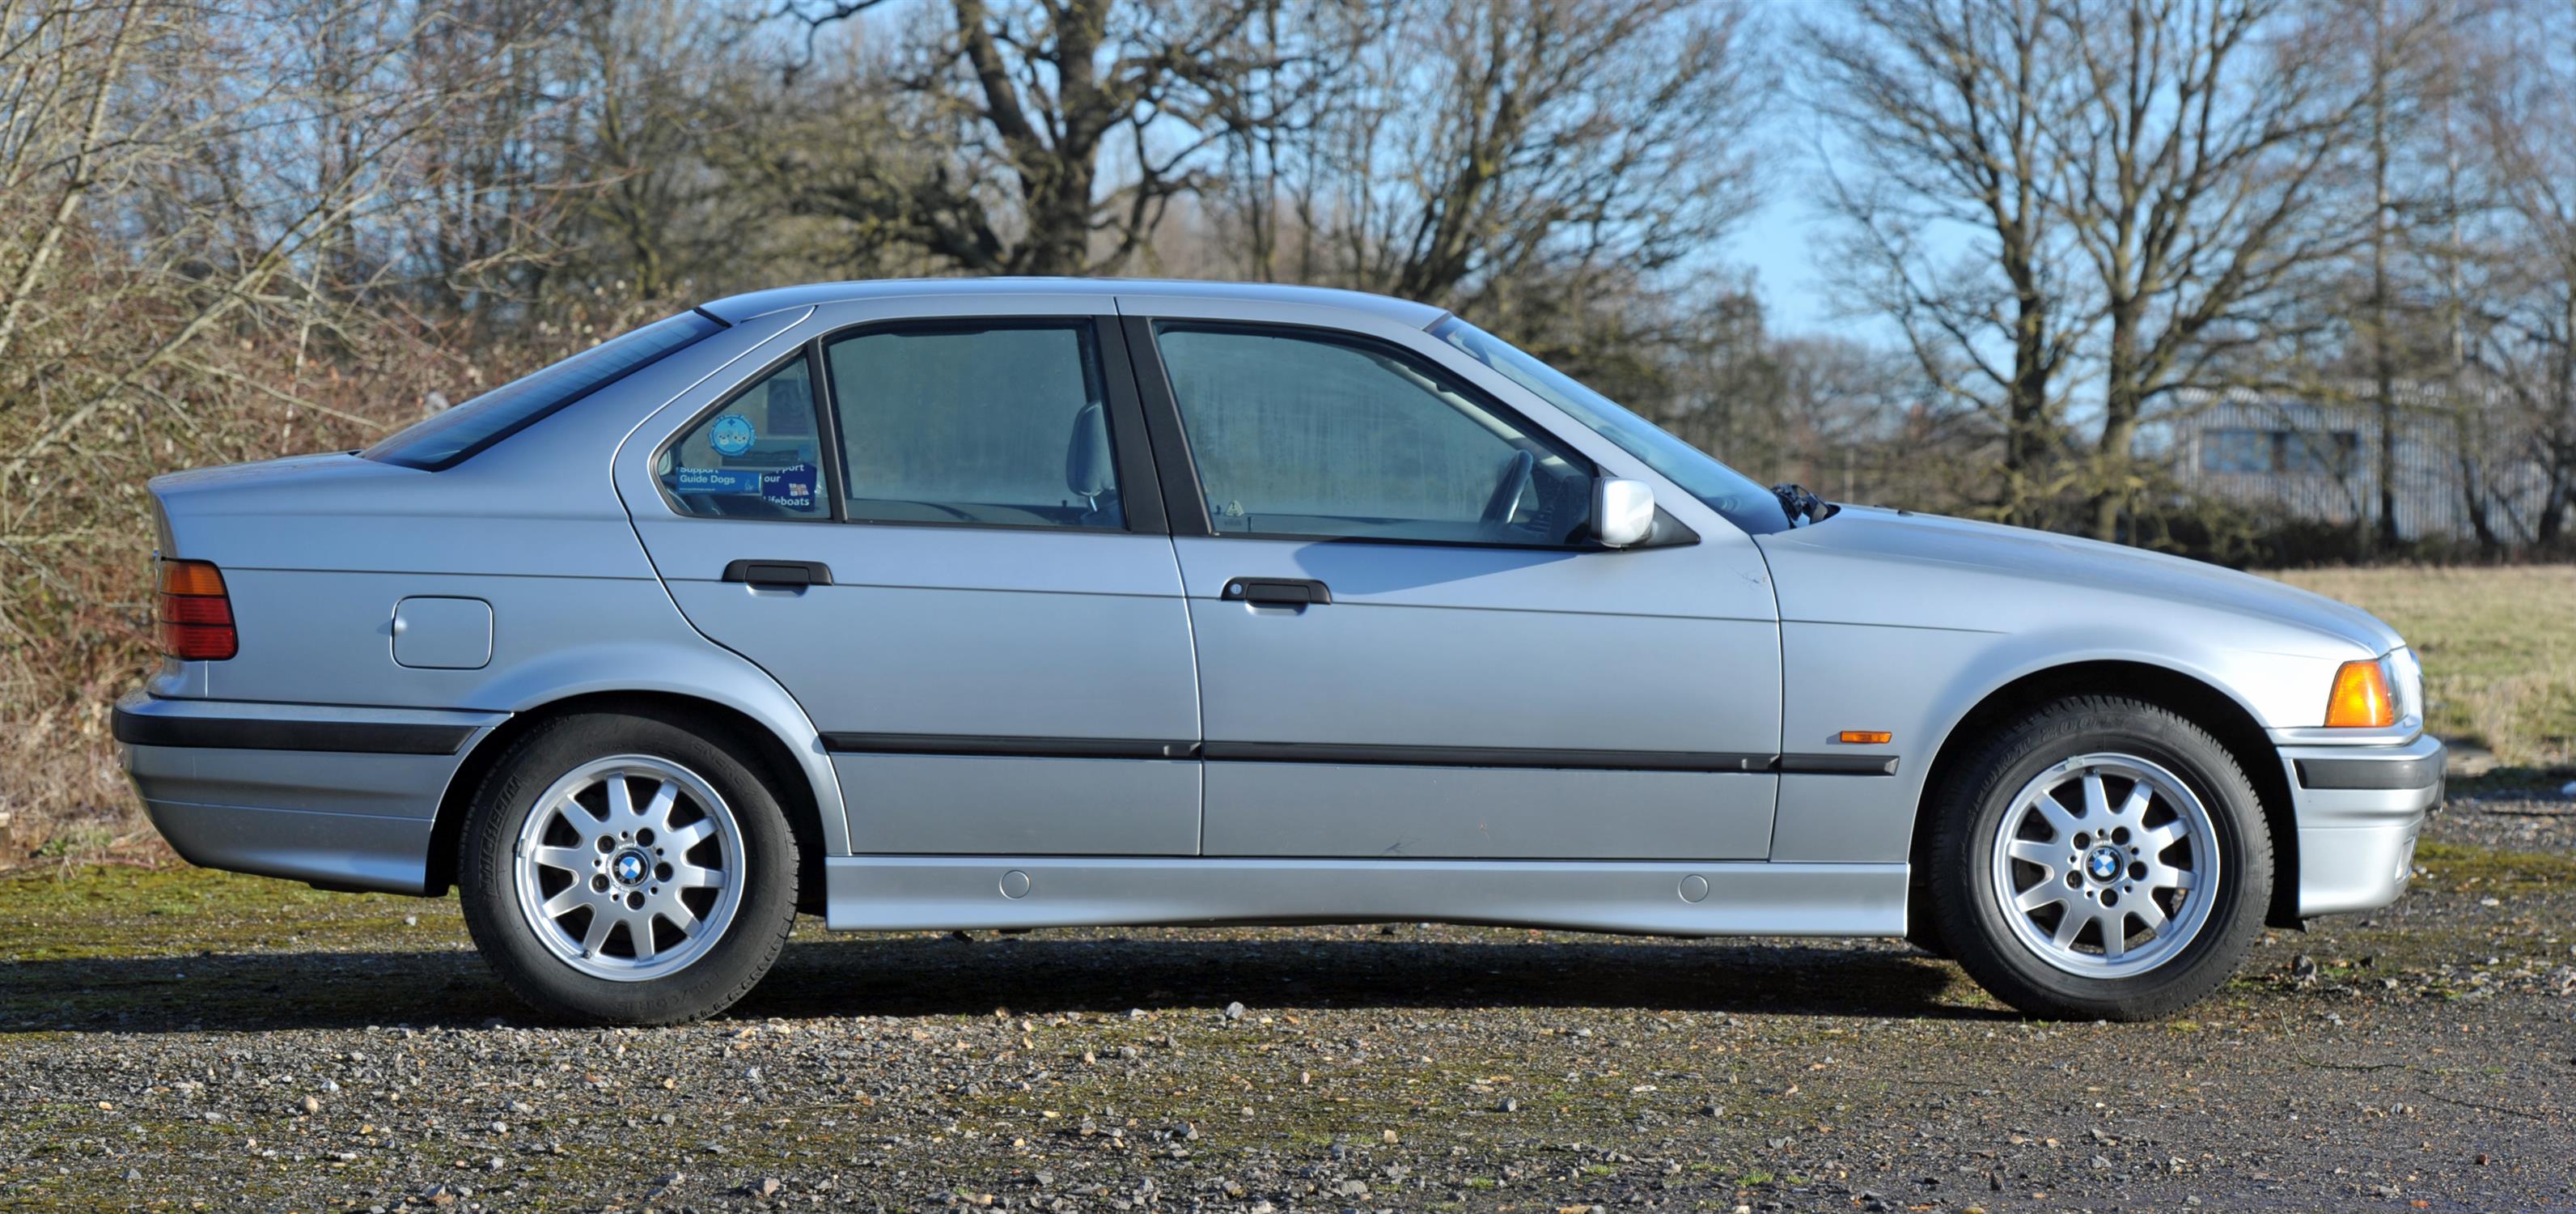 1997 BMW 323i SE Petrol Saloon Manual. Registration number: R93 AHJ. Only one owner with a genuine - Image 2 of 14